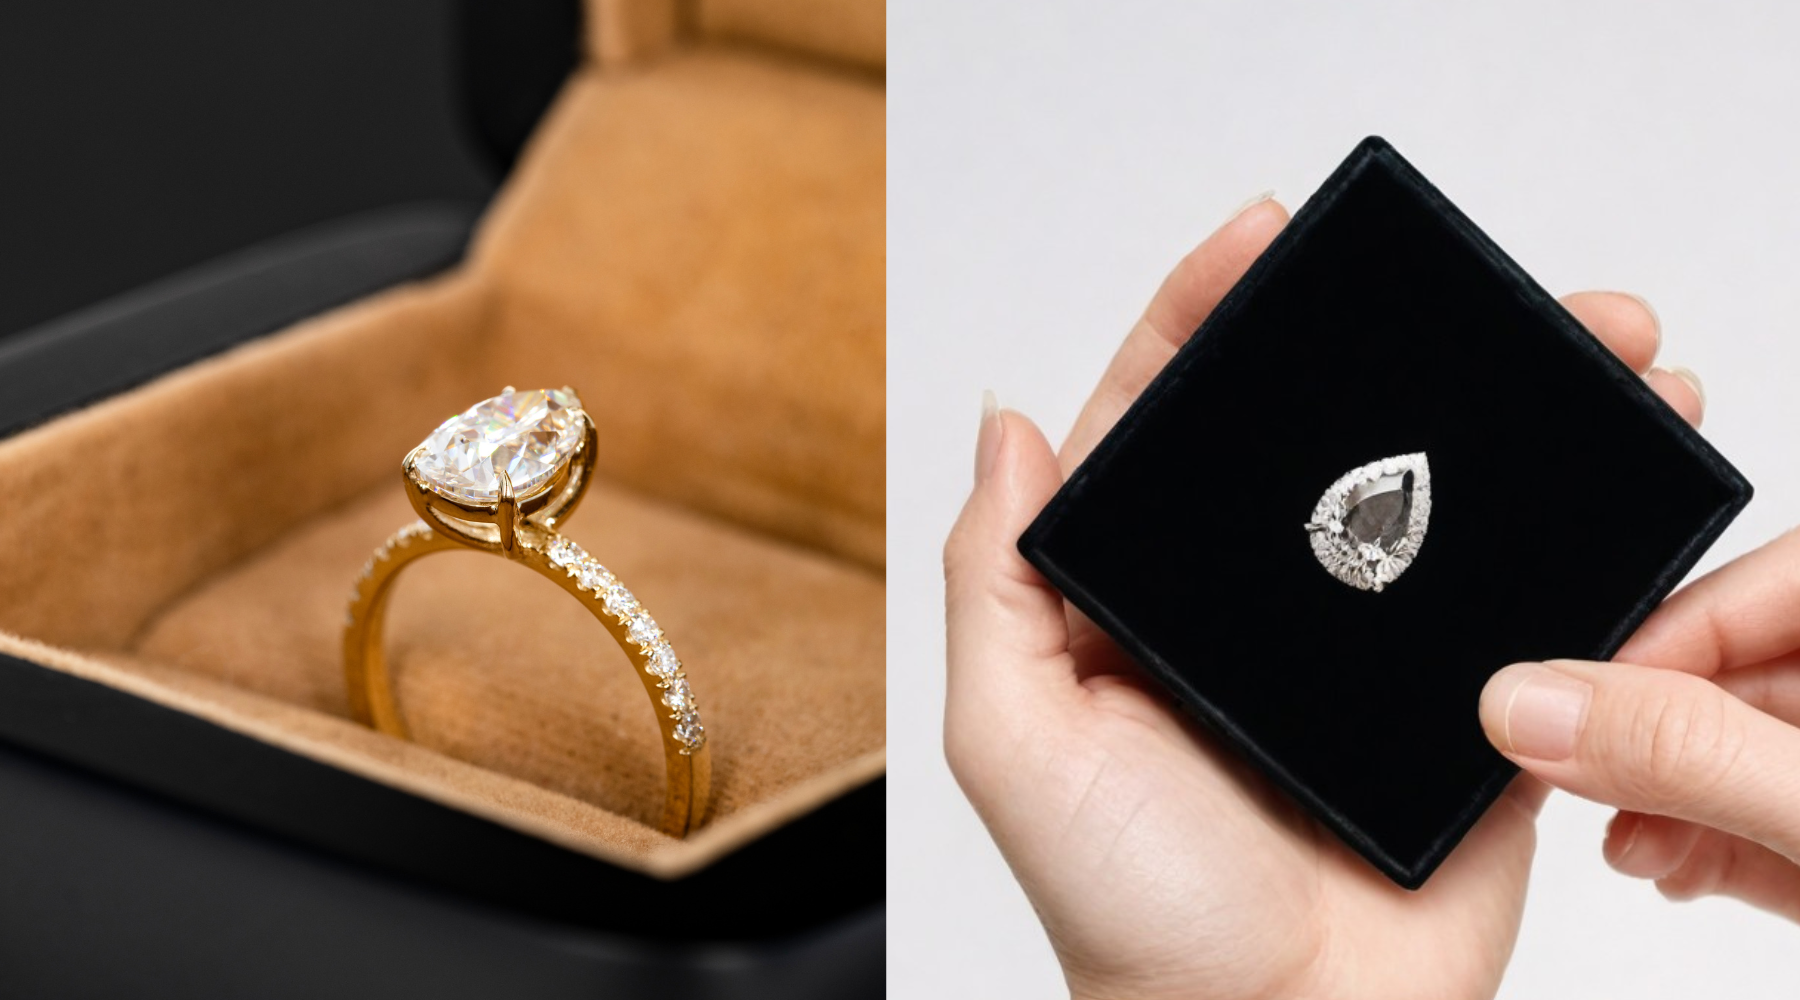 How Can Proposing with a Loose Diamond Simplify Romance?